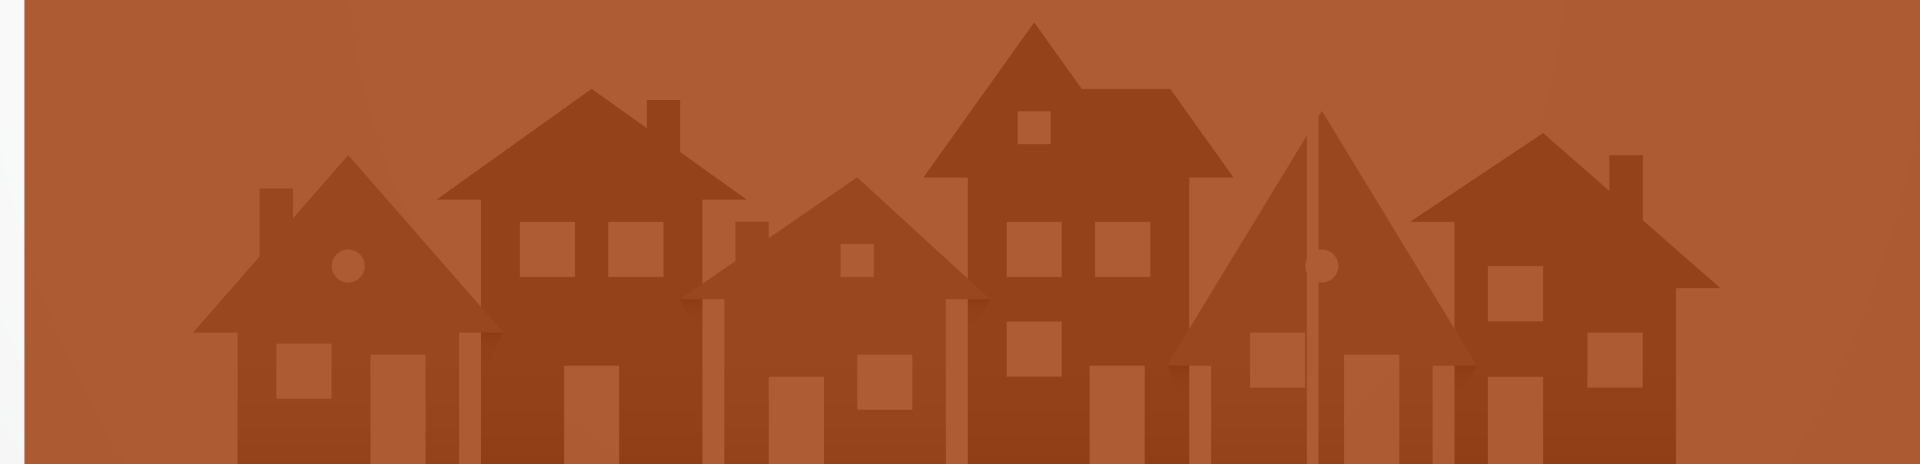 A row of houses cast a shadow on a brown background